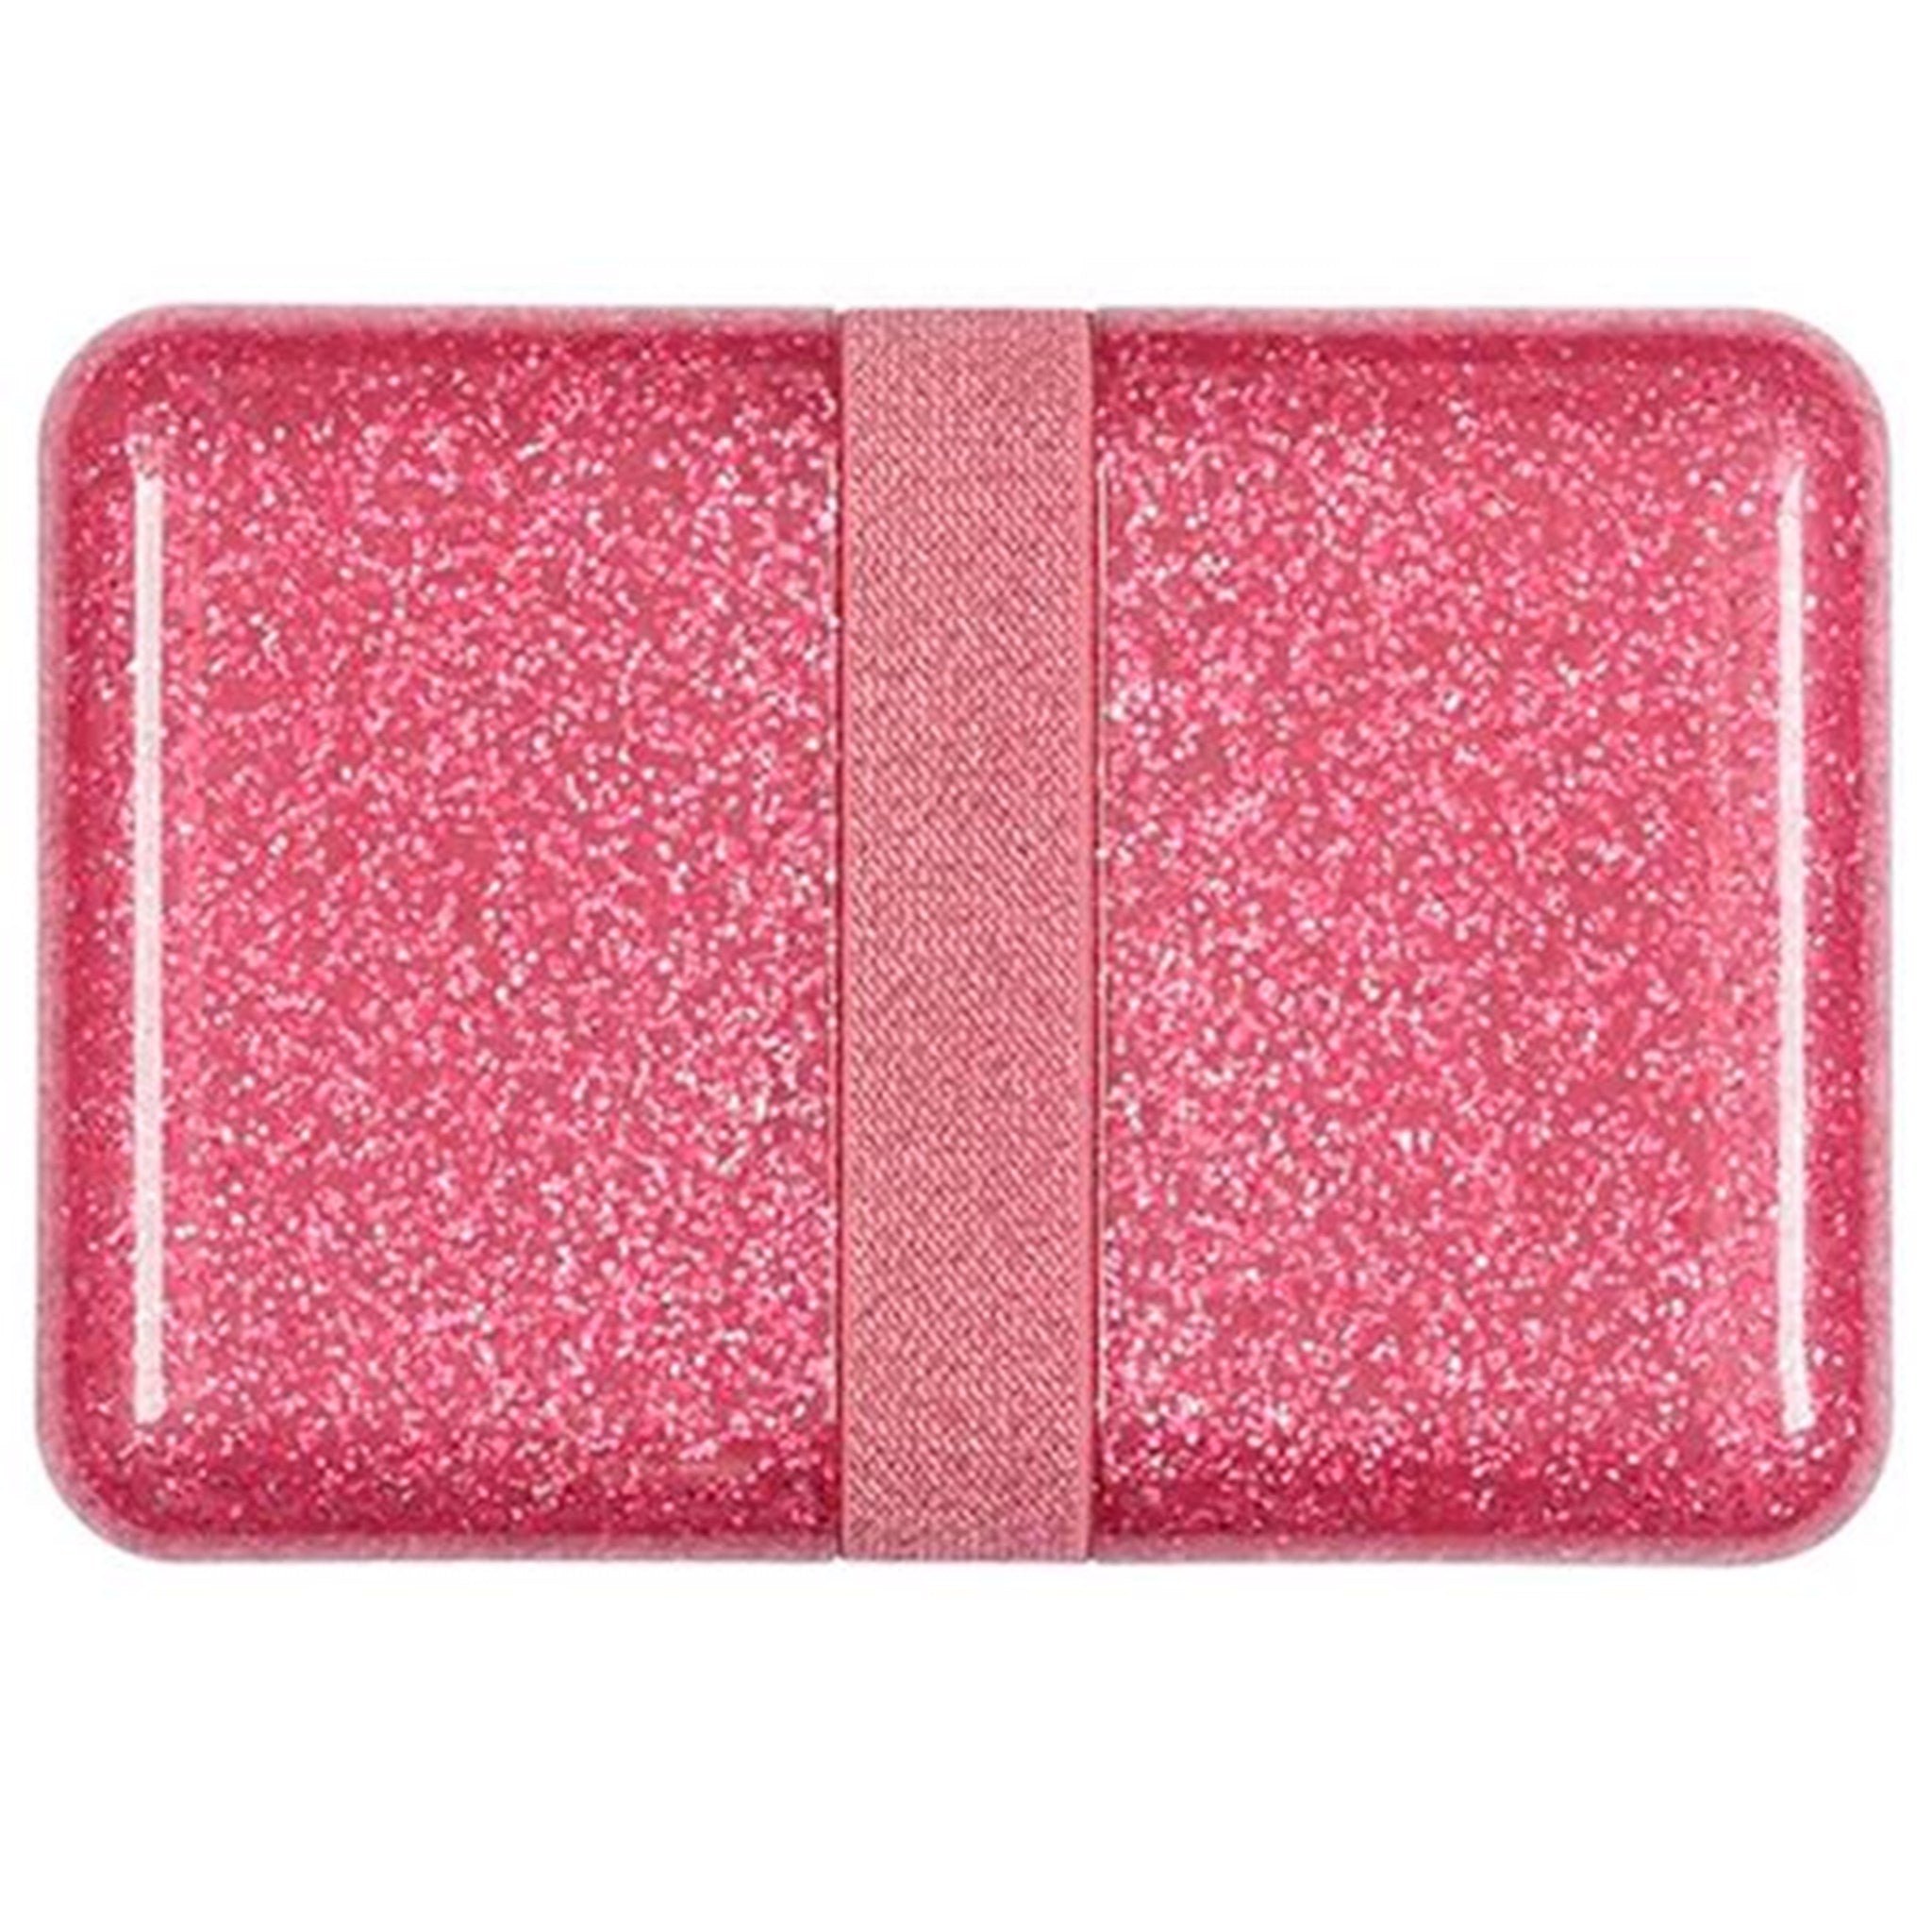 A Little Lovely Company Lunch Box Glitter Pink 3